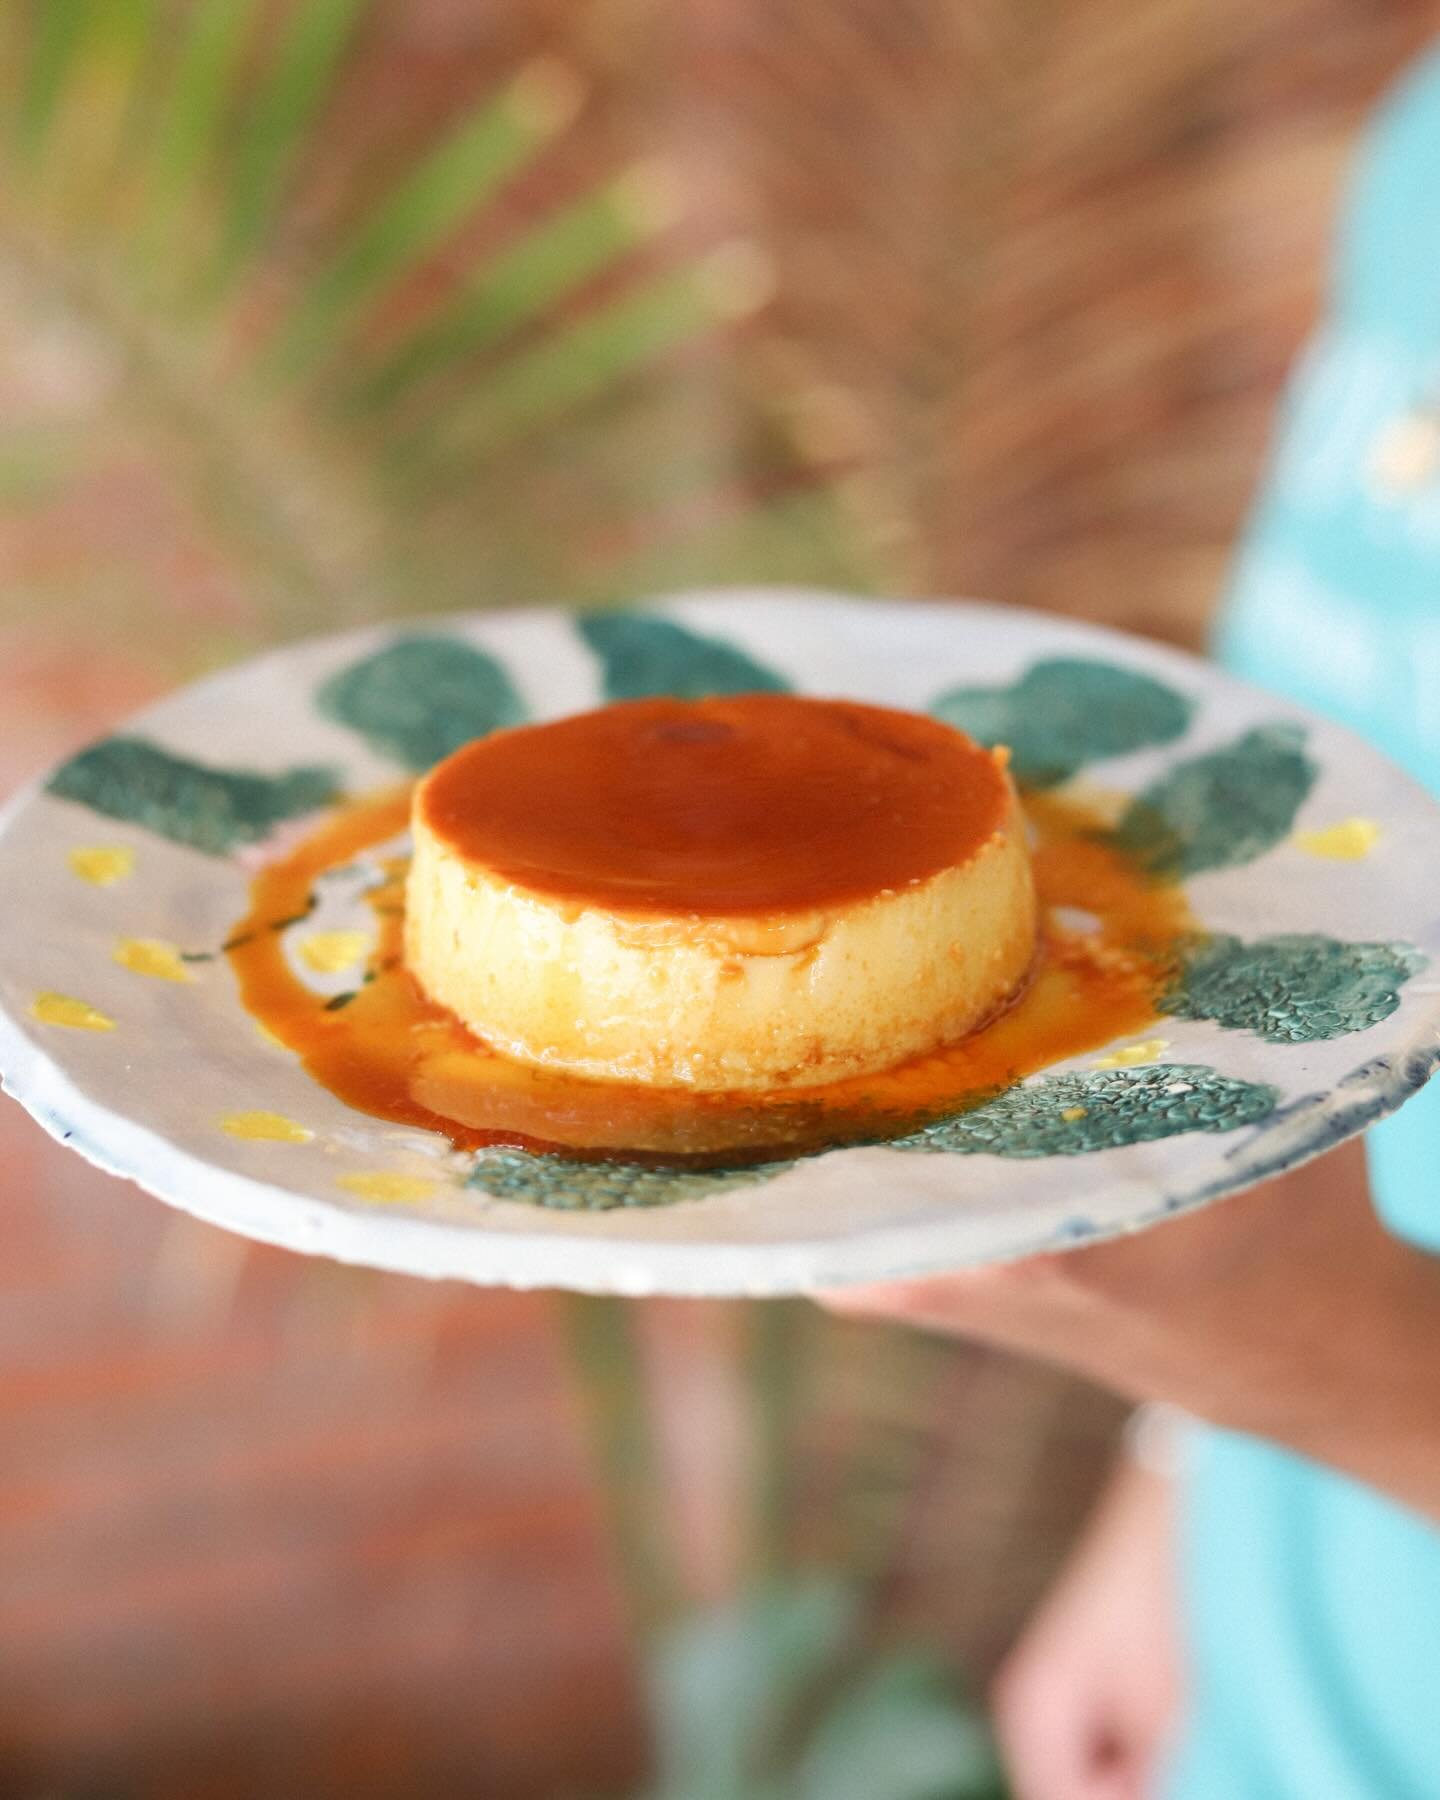 Whose ready for a new dessert!!! Starting today on our menu we are now serving Flan!! 

Walk-ins always welcome. Menu, reservations + more at RoninTX.com 🤠

📸: @jadynscamera
🍮: @zaeden.martinez